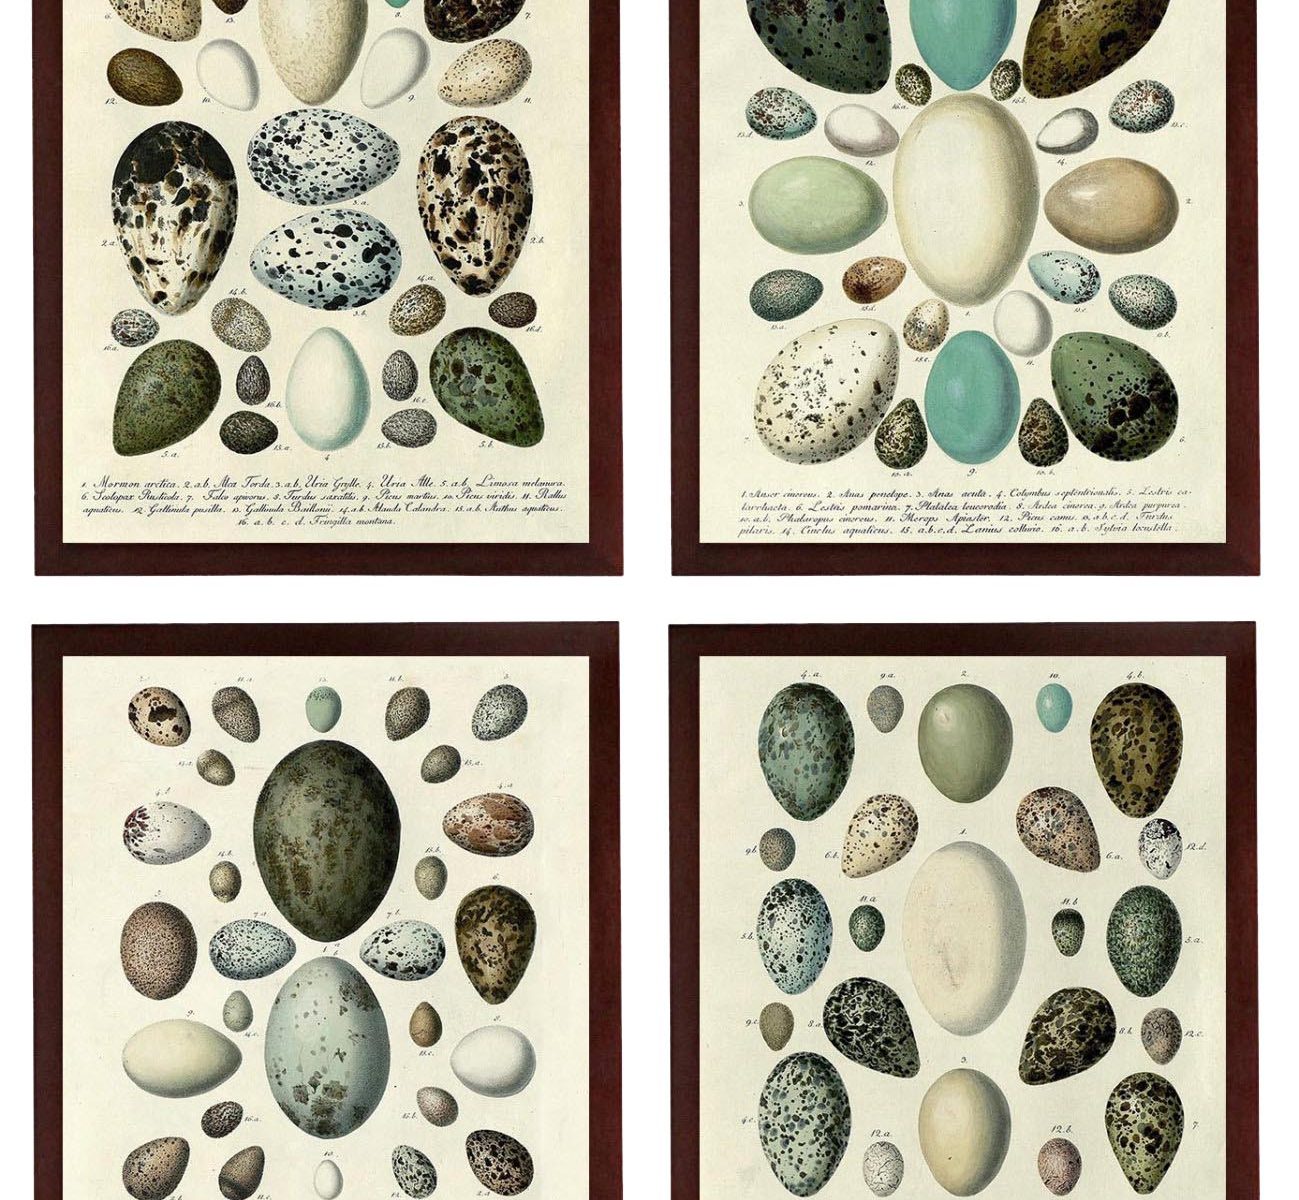 INSTANT DOWNLOAD Vintage Bird Eggs illustration Set of 4 Old Style Prints Poster Antique Drawing Book Page Printable Art Art Print